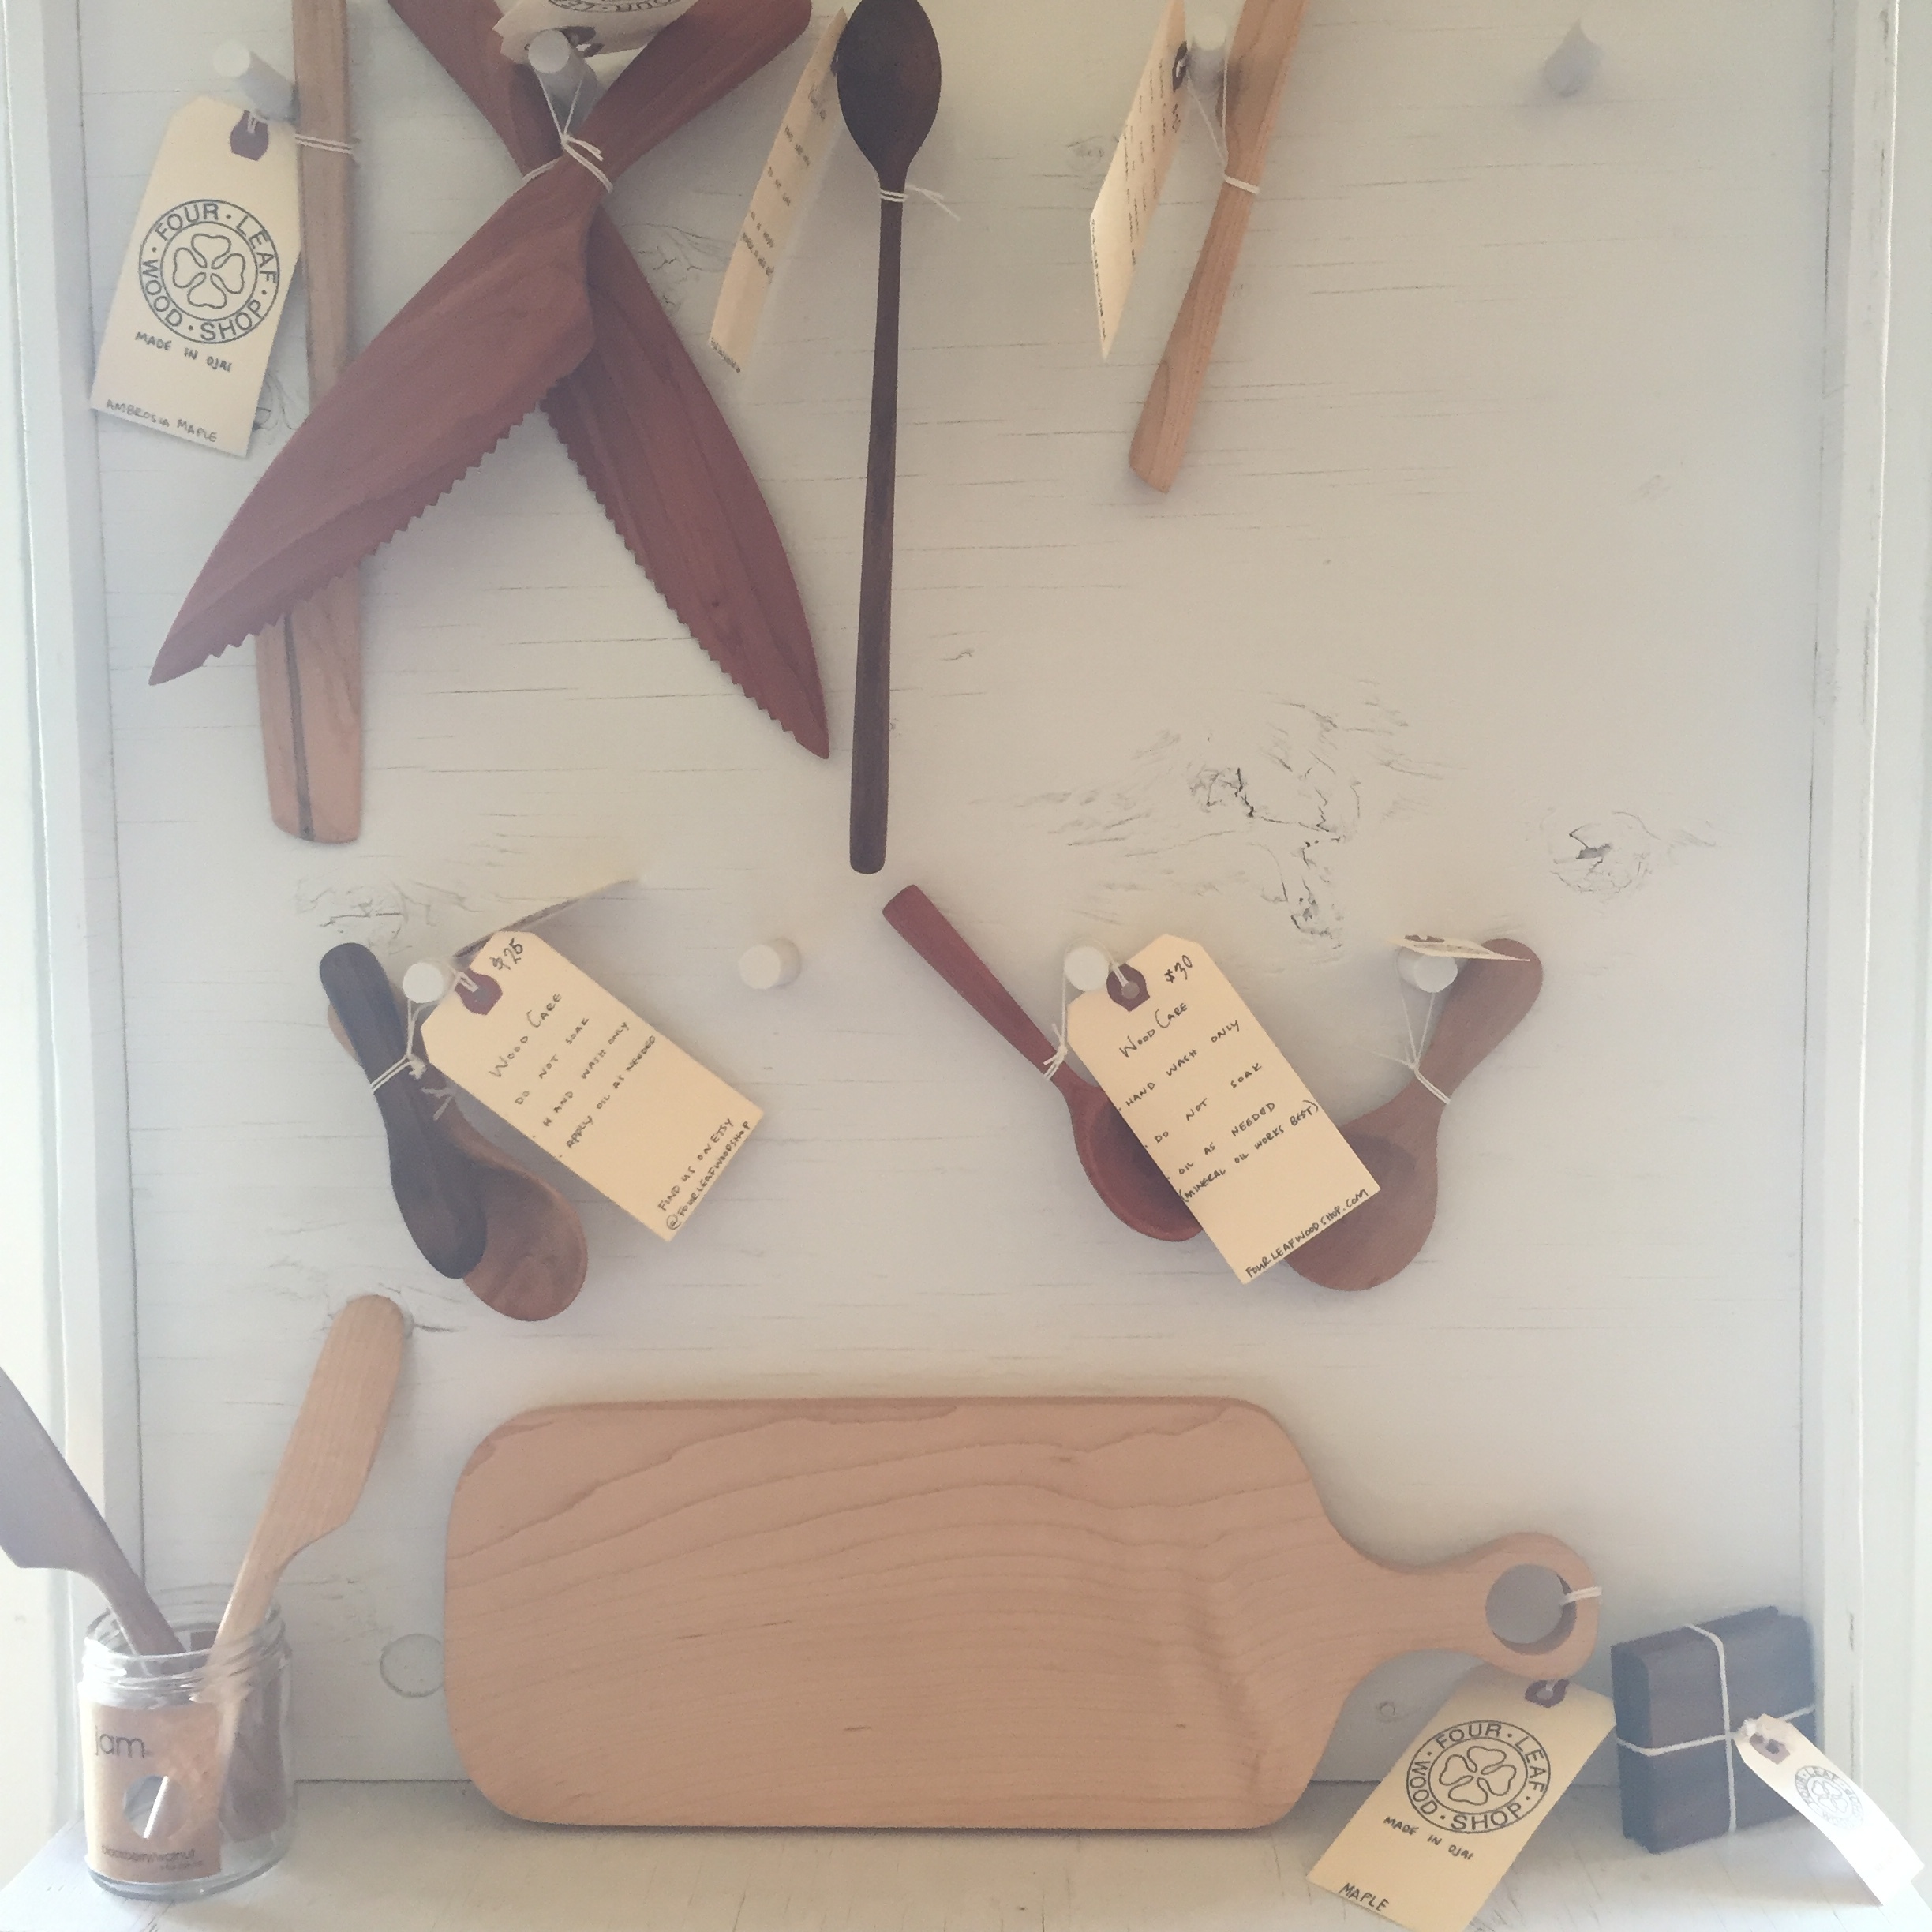 Primitive wares for sale and Knead Baking Company